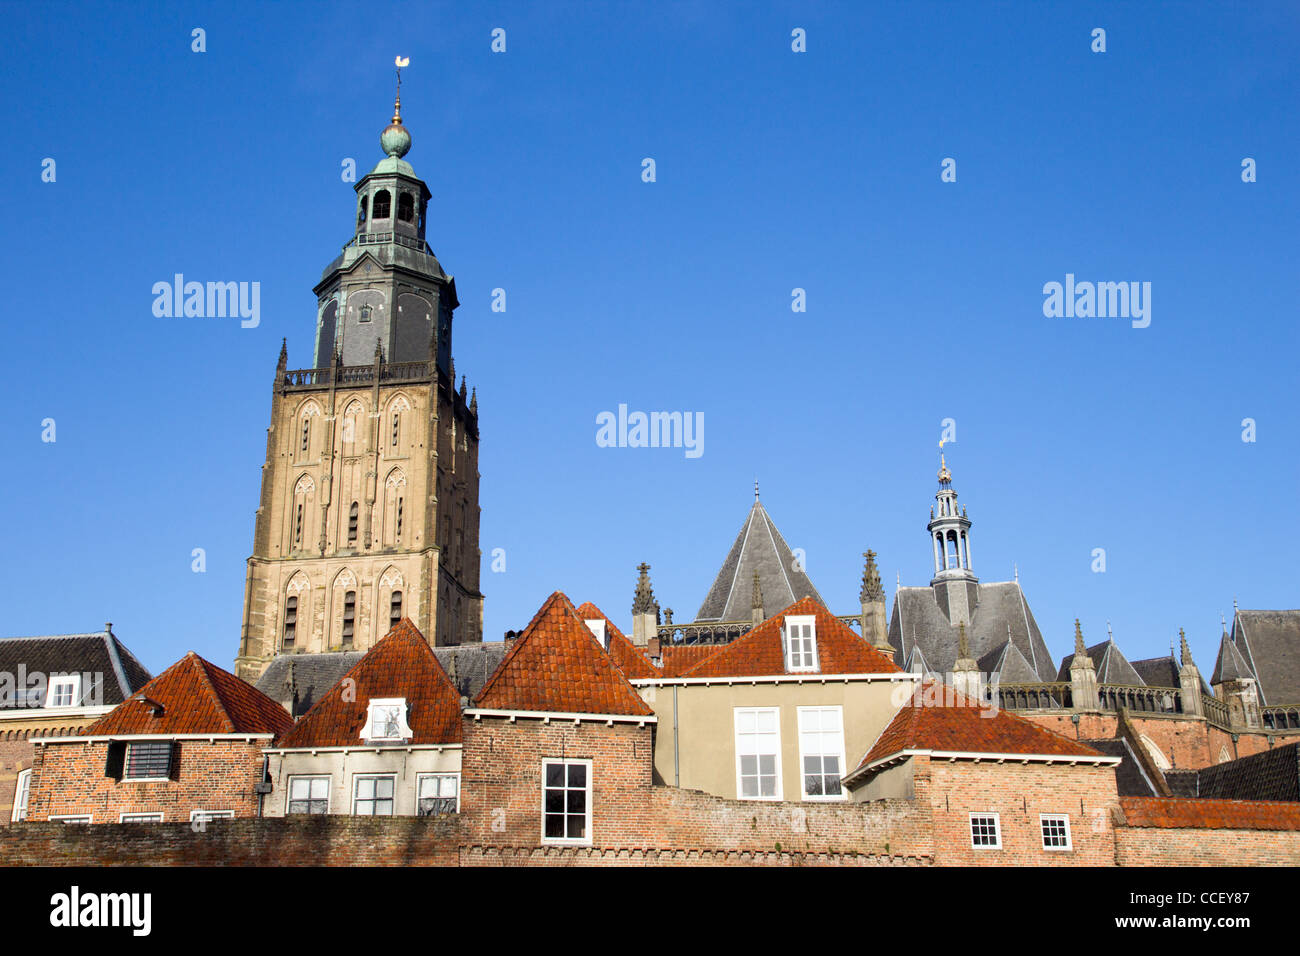 City view of Zutphen, The Netherlands Stock Photo